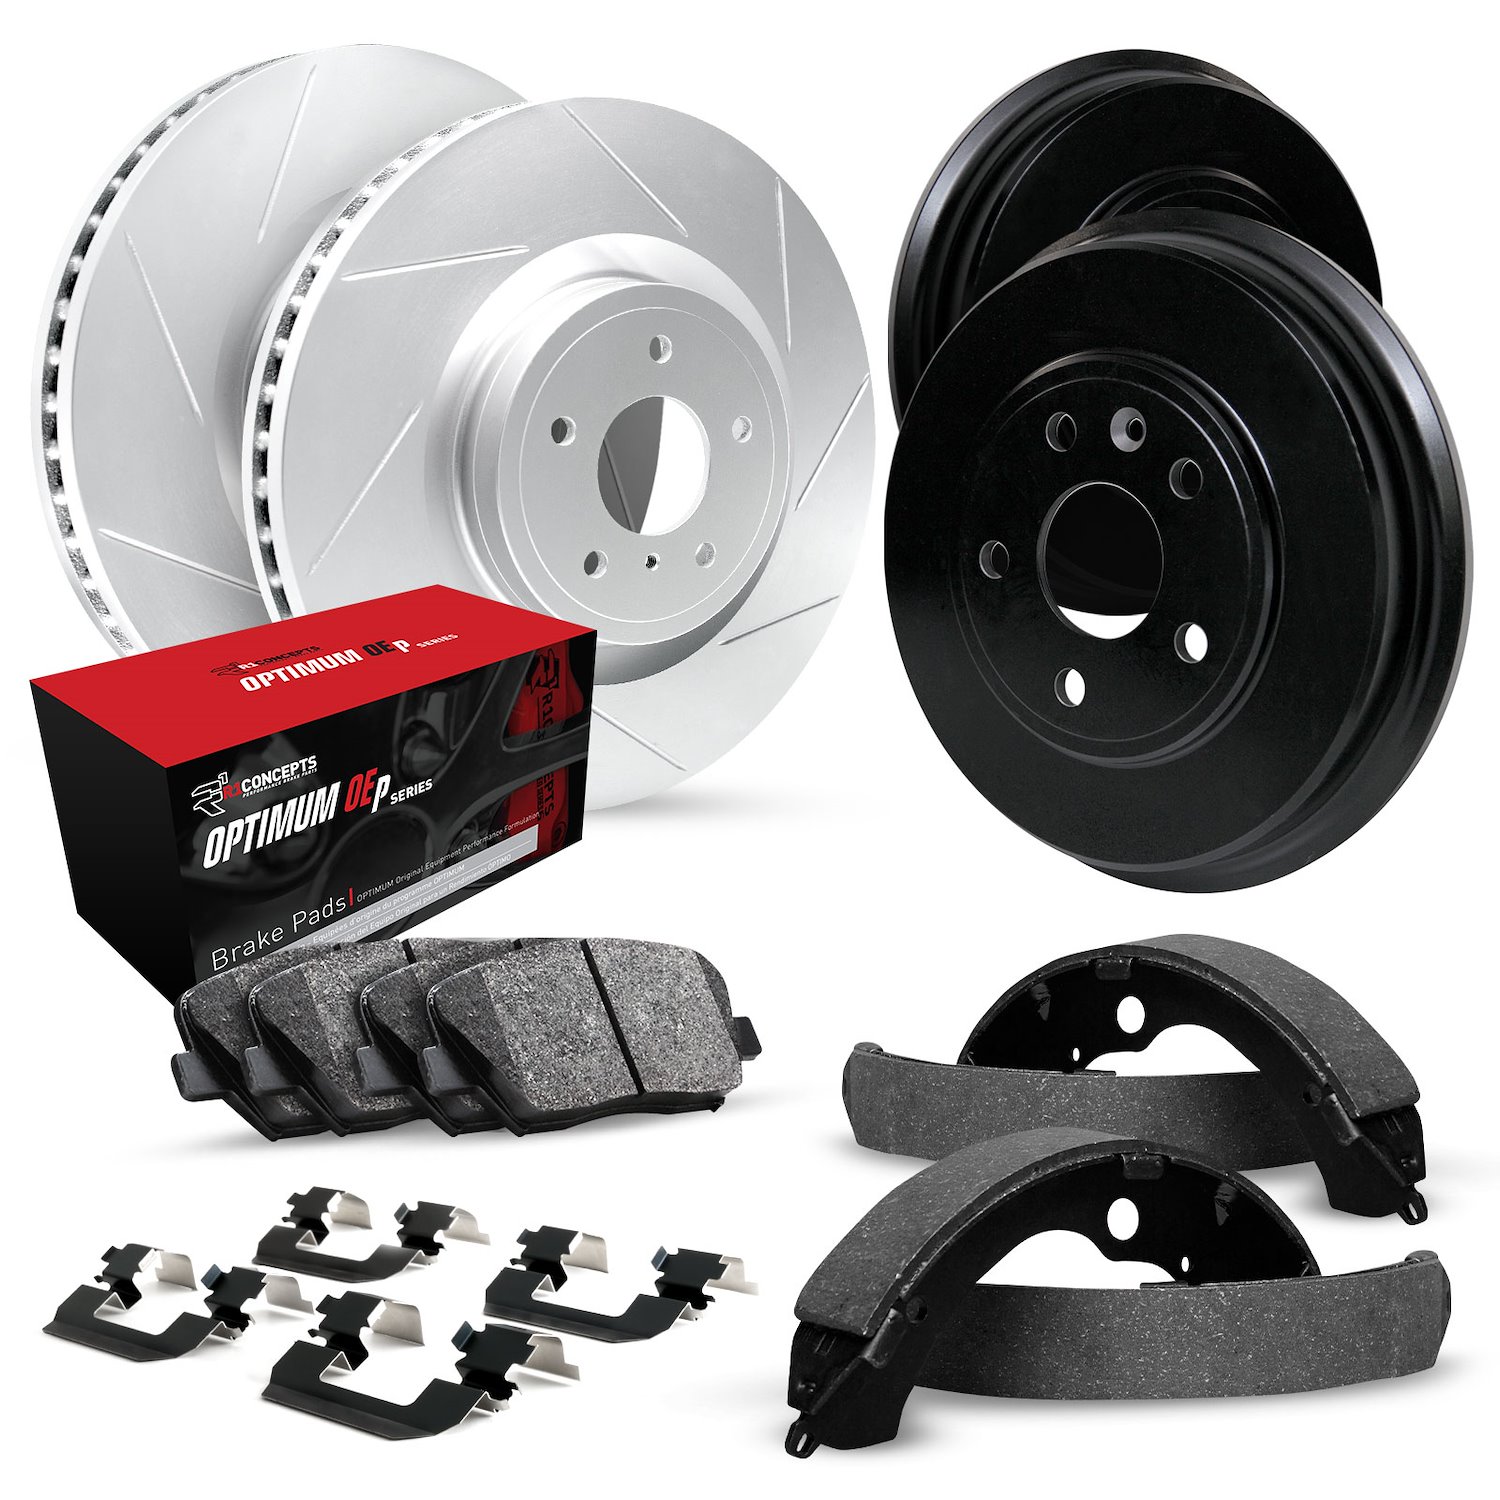 GEO-Carbon Slotted Brake Rotor & Drum Set w/Optimum OE Pads, Shoes, & Hardware, 1986-1989 Ford/Lincoln/Mercury/Mazda